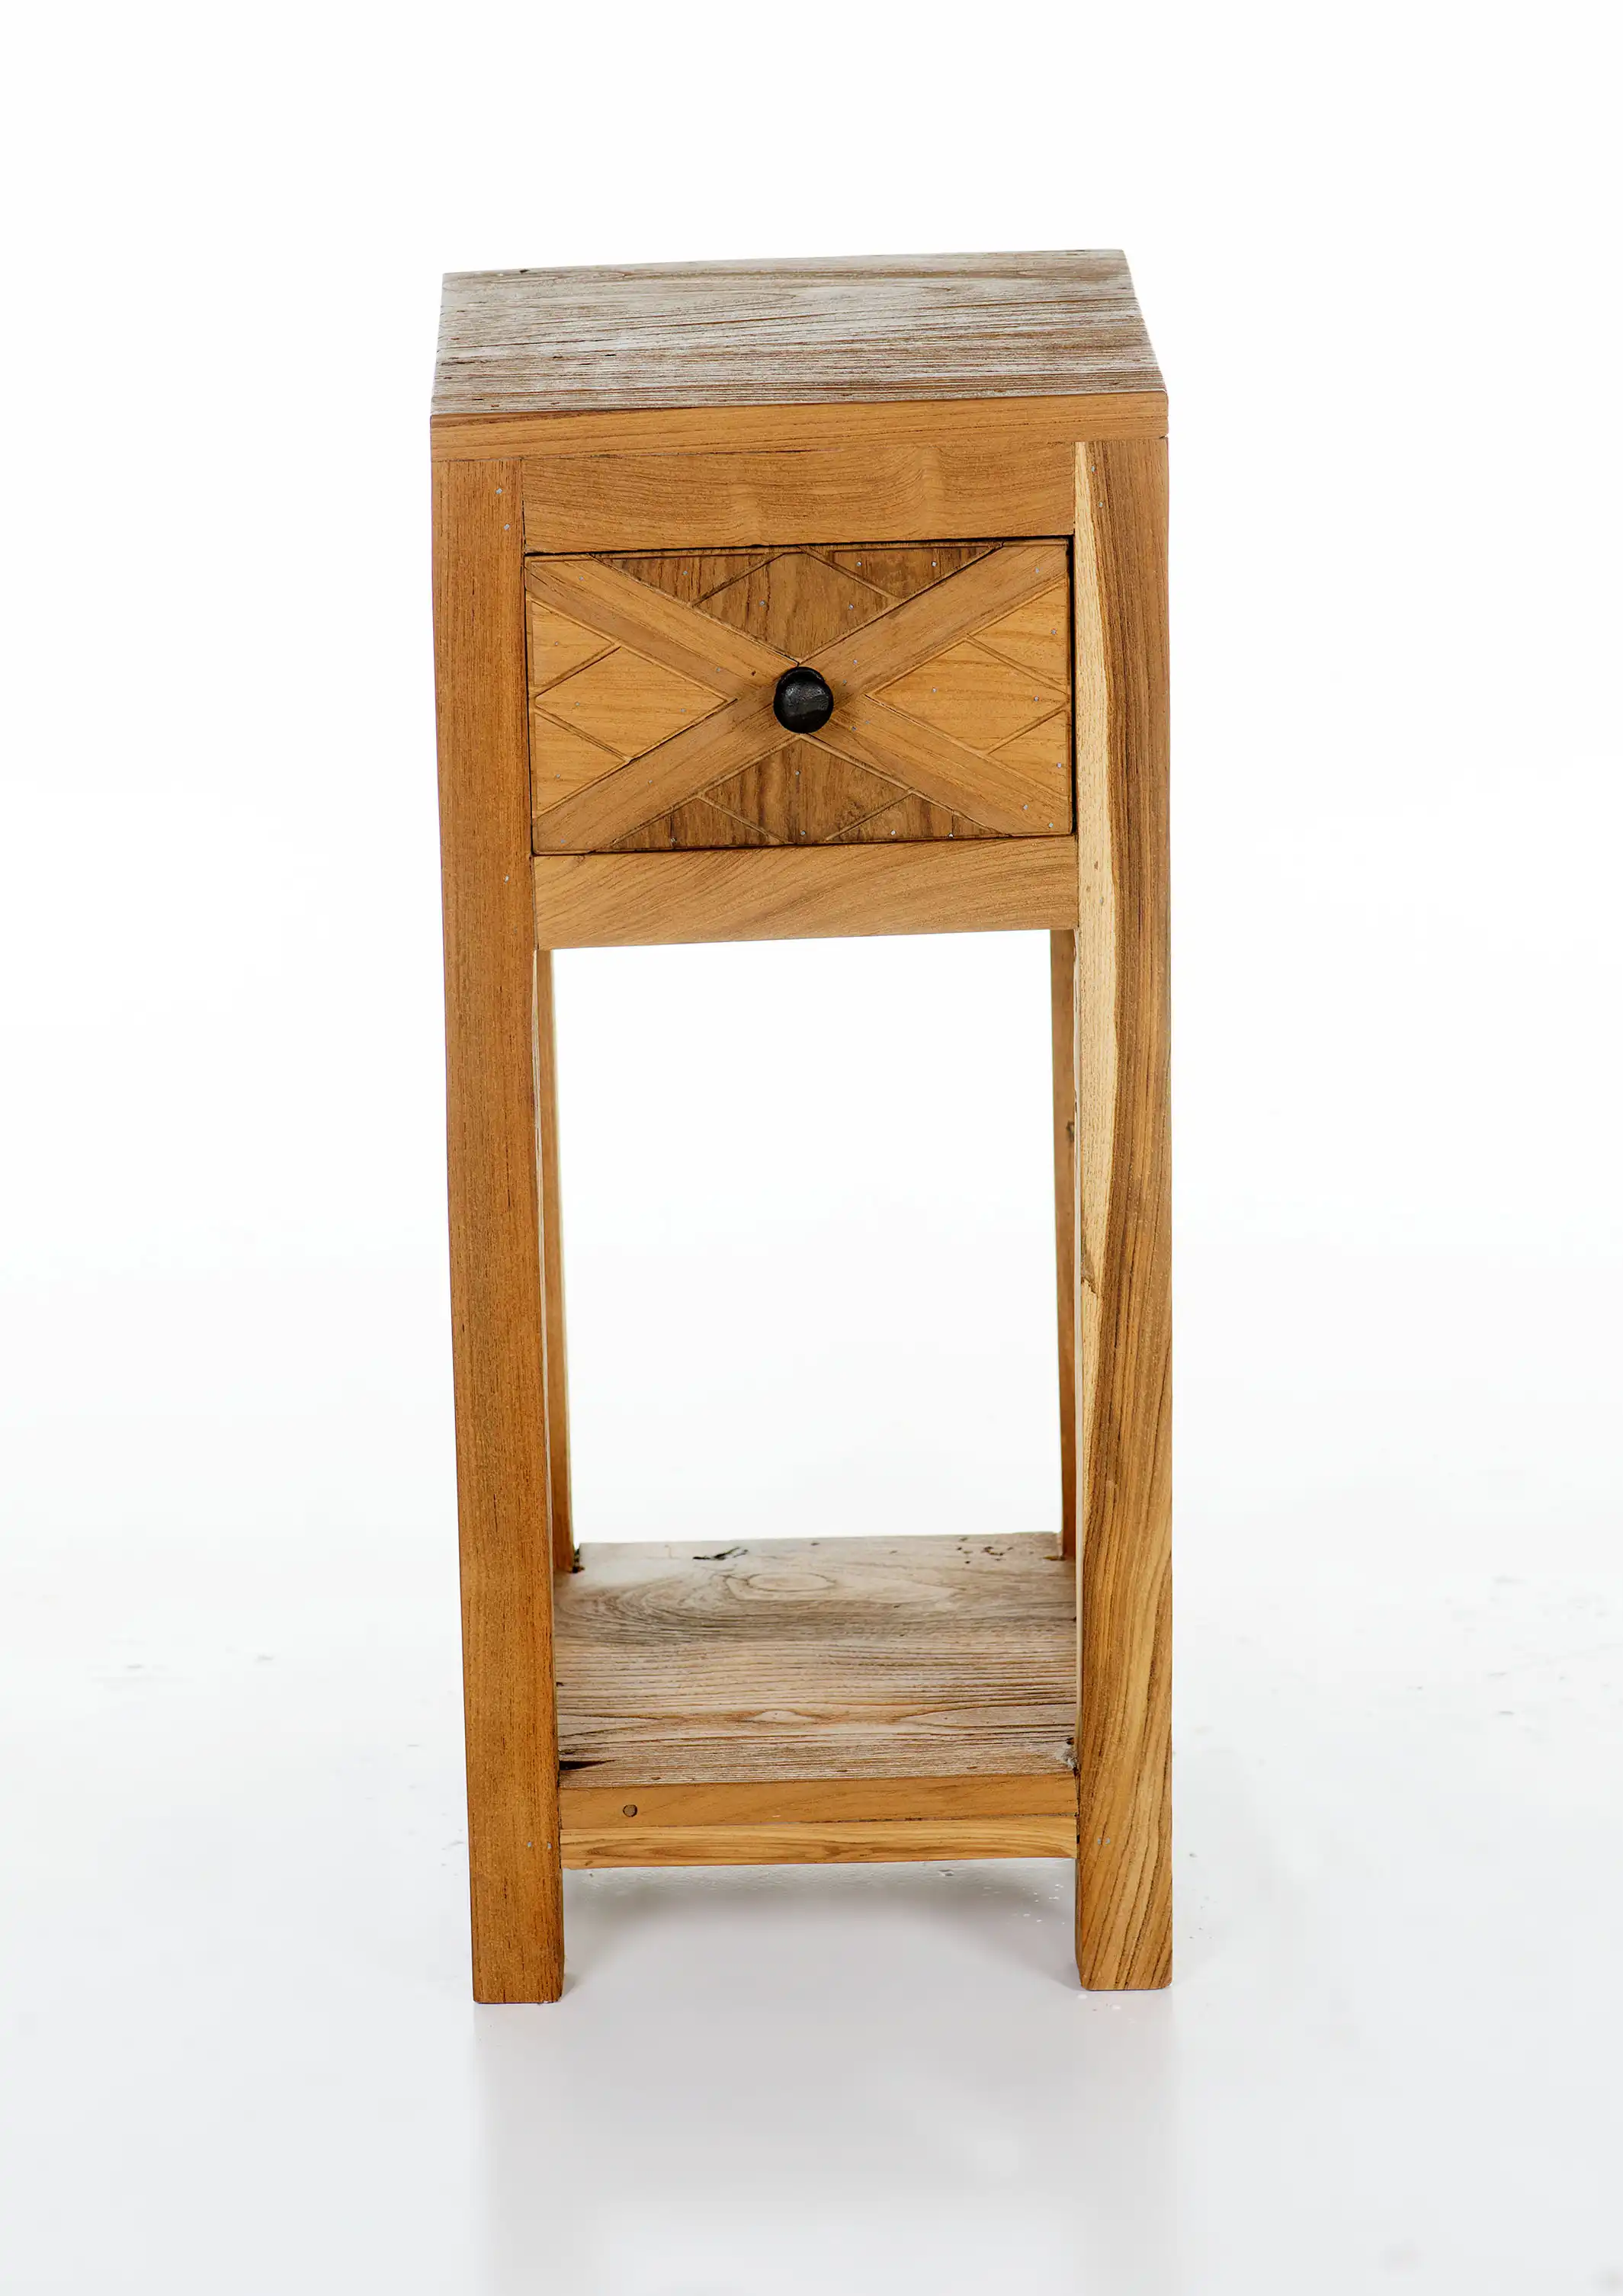 Parket Collection's Wooden Side Table with 1 Drawer & 1 Shelf - popular handicrafts